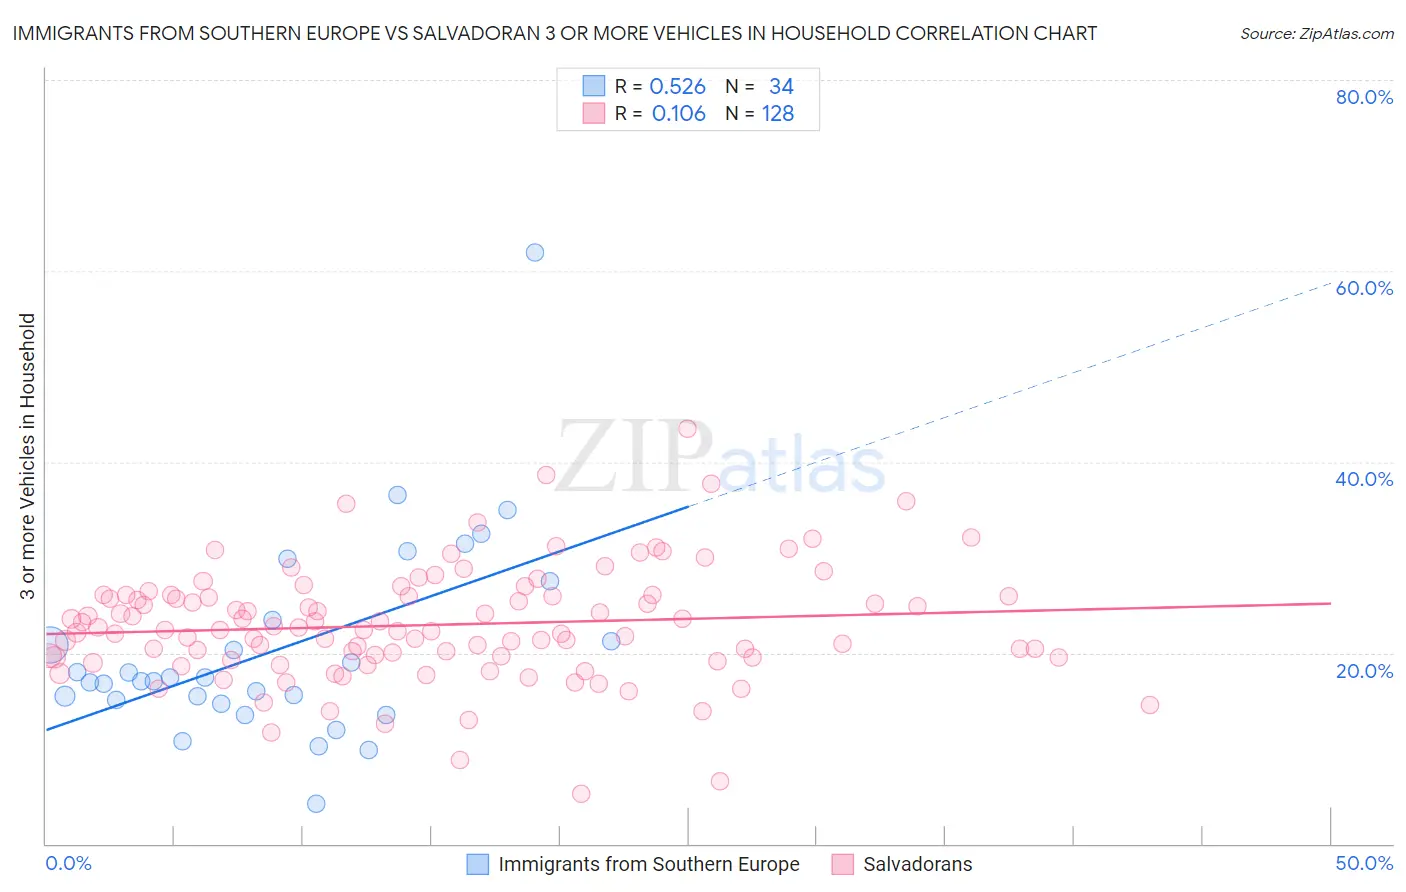 Immigrants from Southern Europe vs Salvadoran 3 or more Vehicles in Household